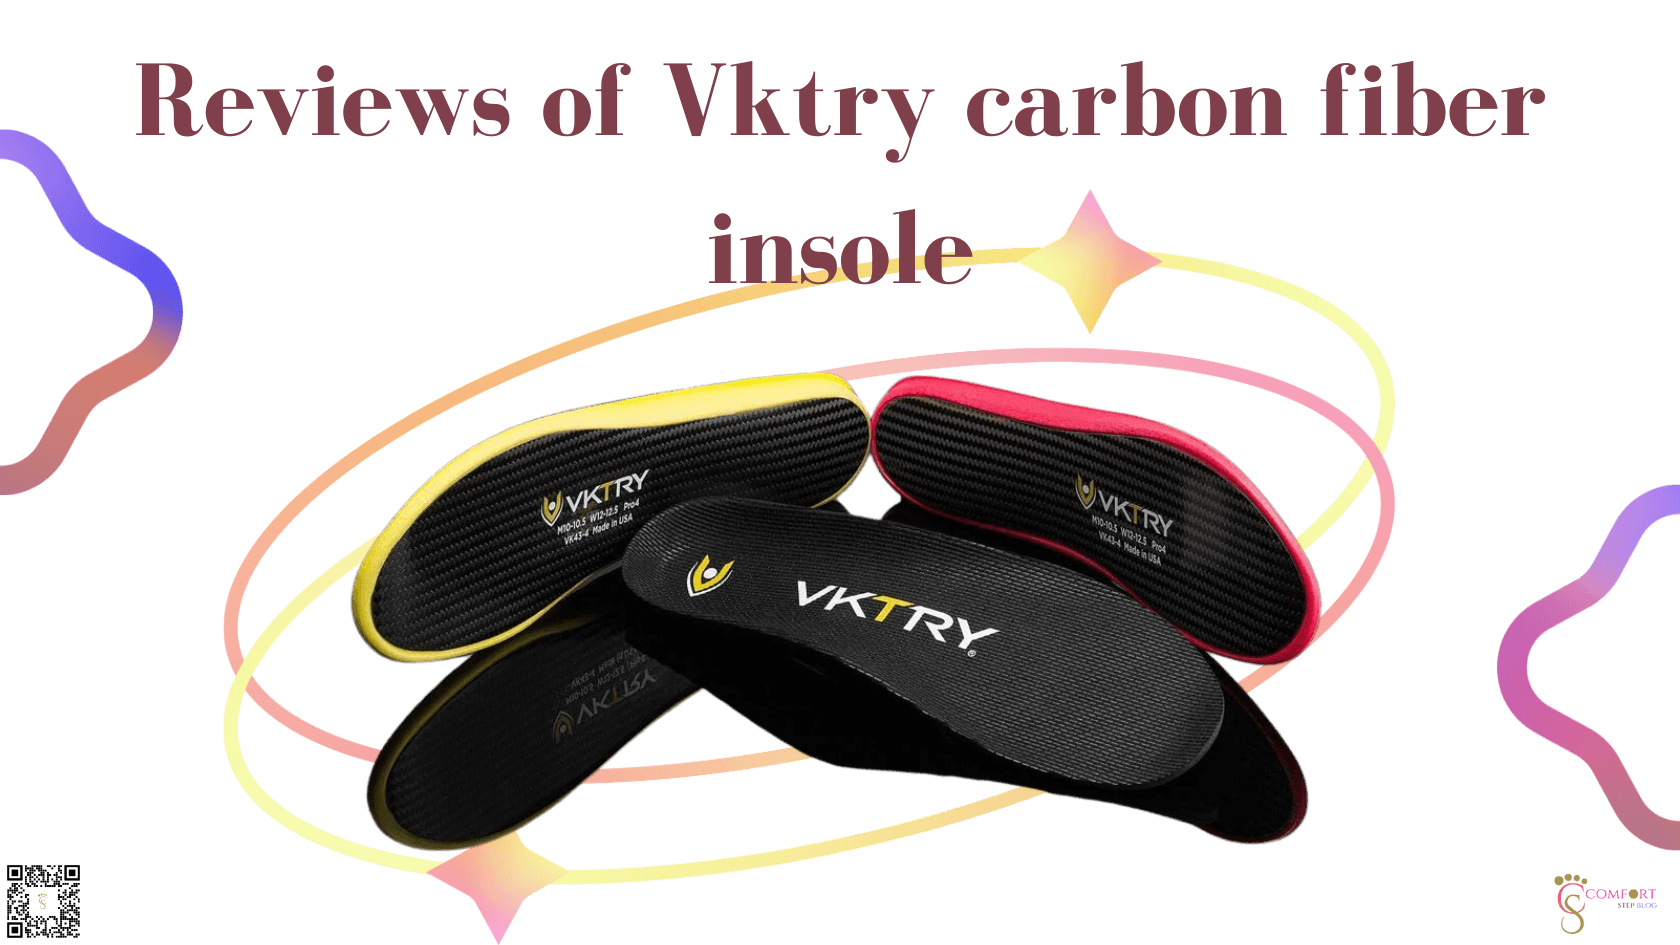 Reviews of Vktry Carbon Fiber Insole